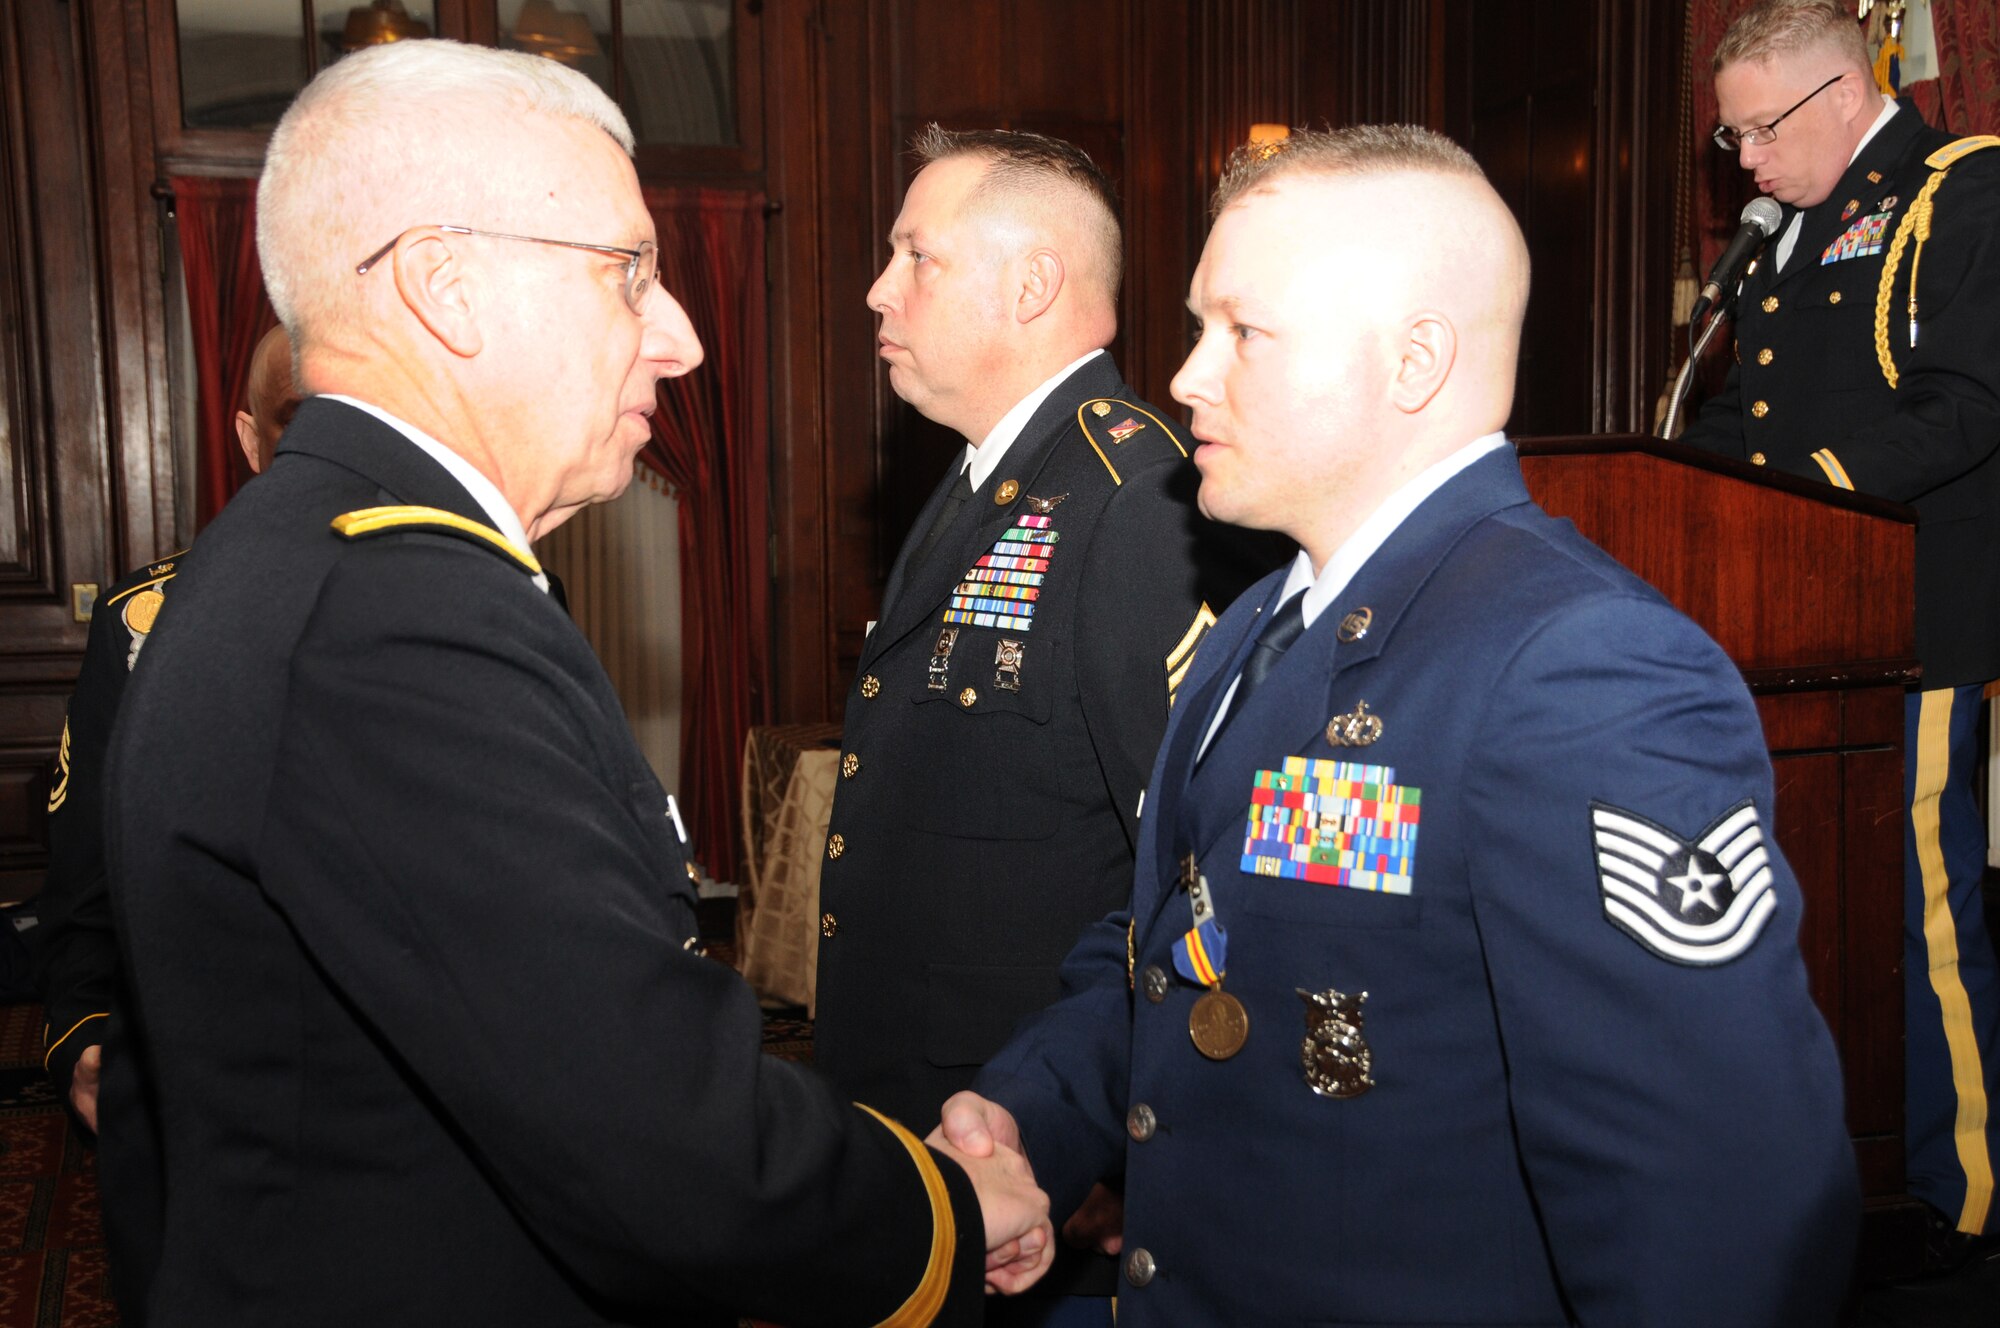 Army Maj. Gen. Wesley E. Craig, adjutant general of Pa. (left) with 2013 Octavius
V. Catto Medal recipients Army Sgt. 1st Class Bruce E. Facer, Sr. (center) and
Tech. Sgt. Kevin Watson (right) at an official award ceremony held Feb. 23 at the
Union League in Philadelphia.